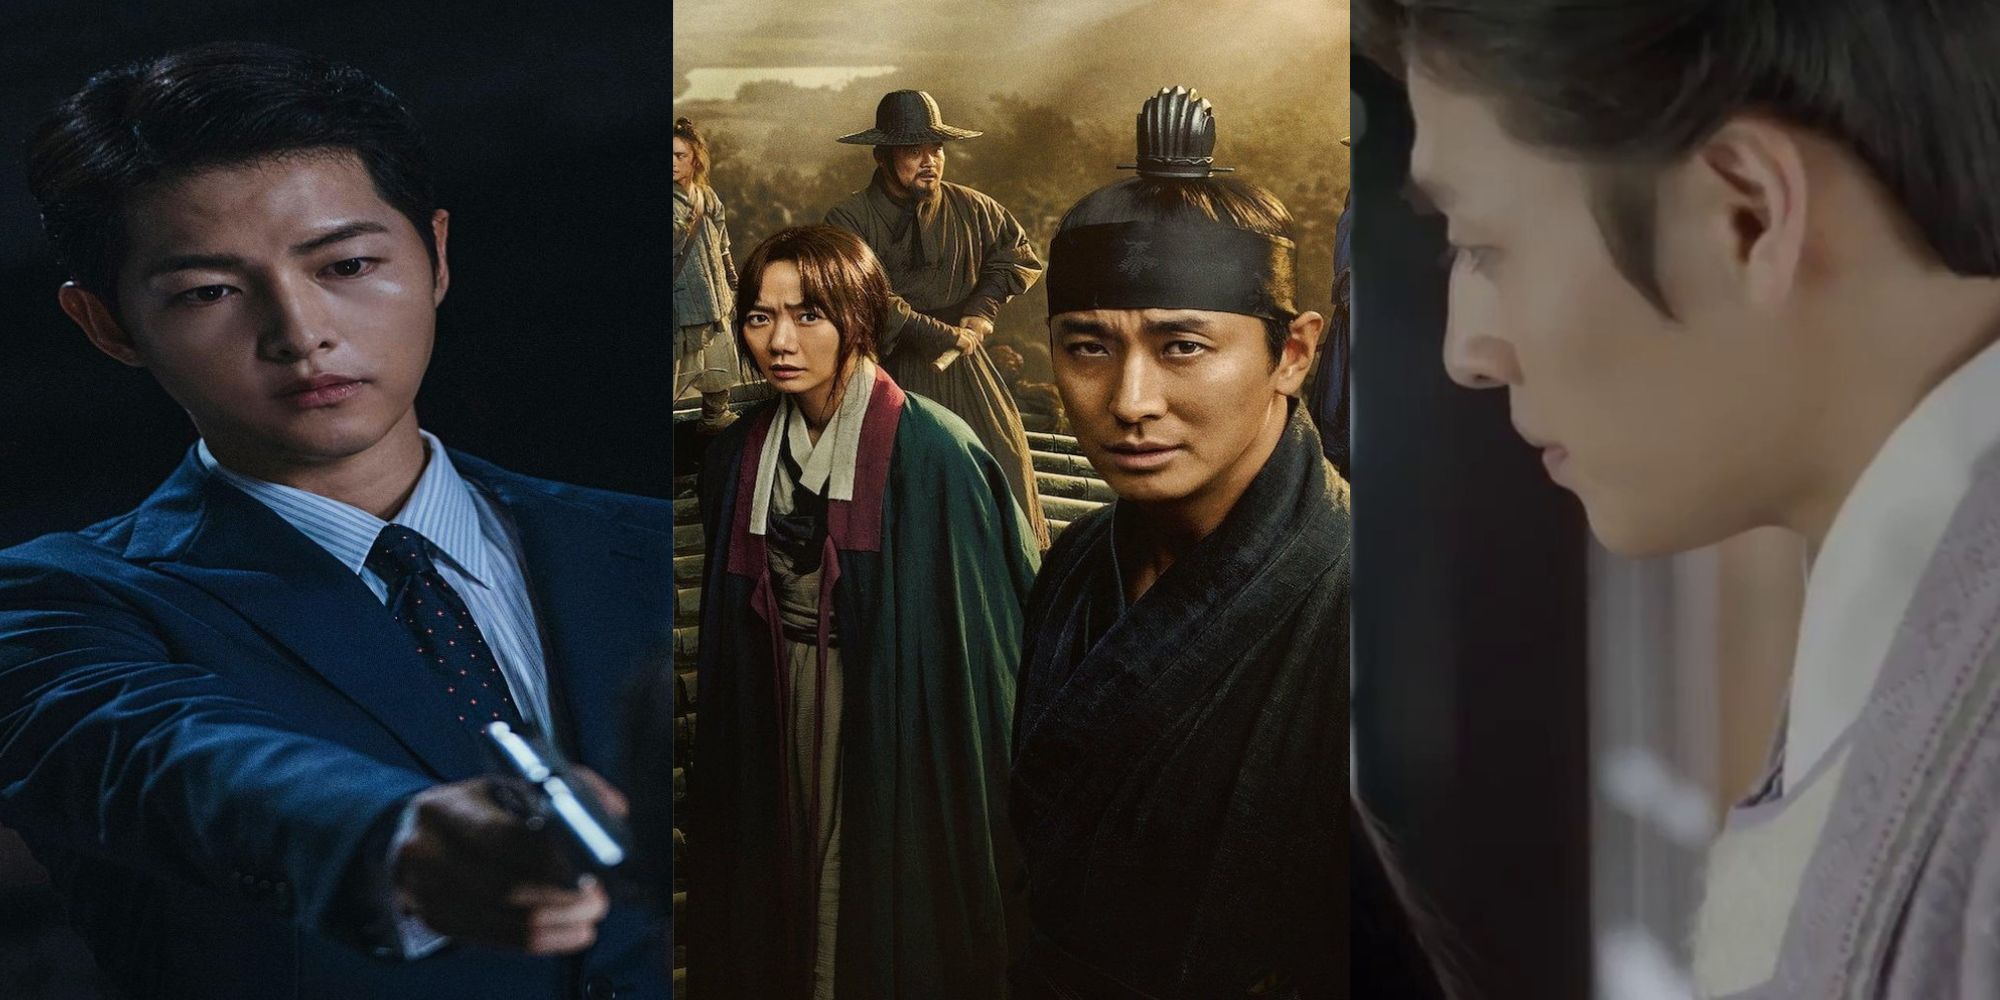 Collage Image of Vincenzo, Kingdom, and Scarlet Heart Ryeo